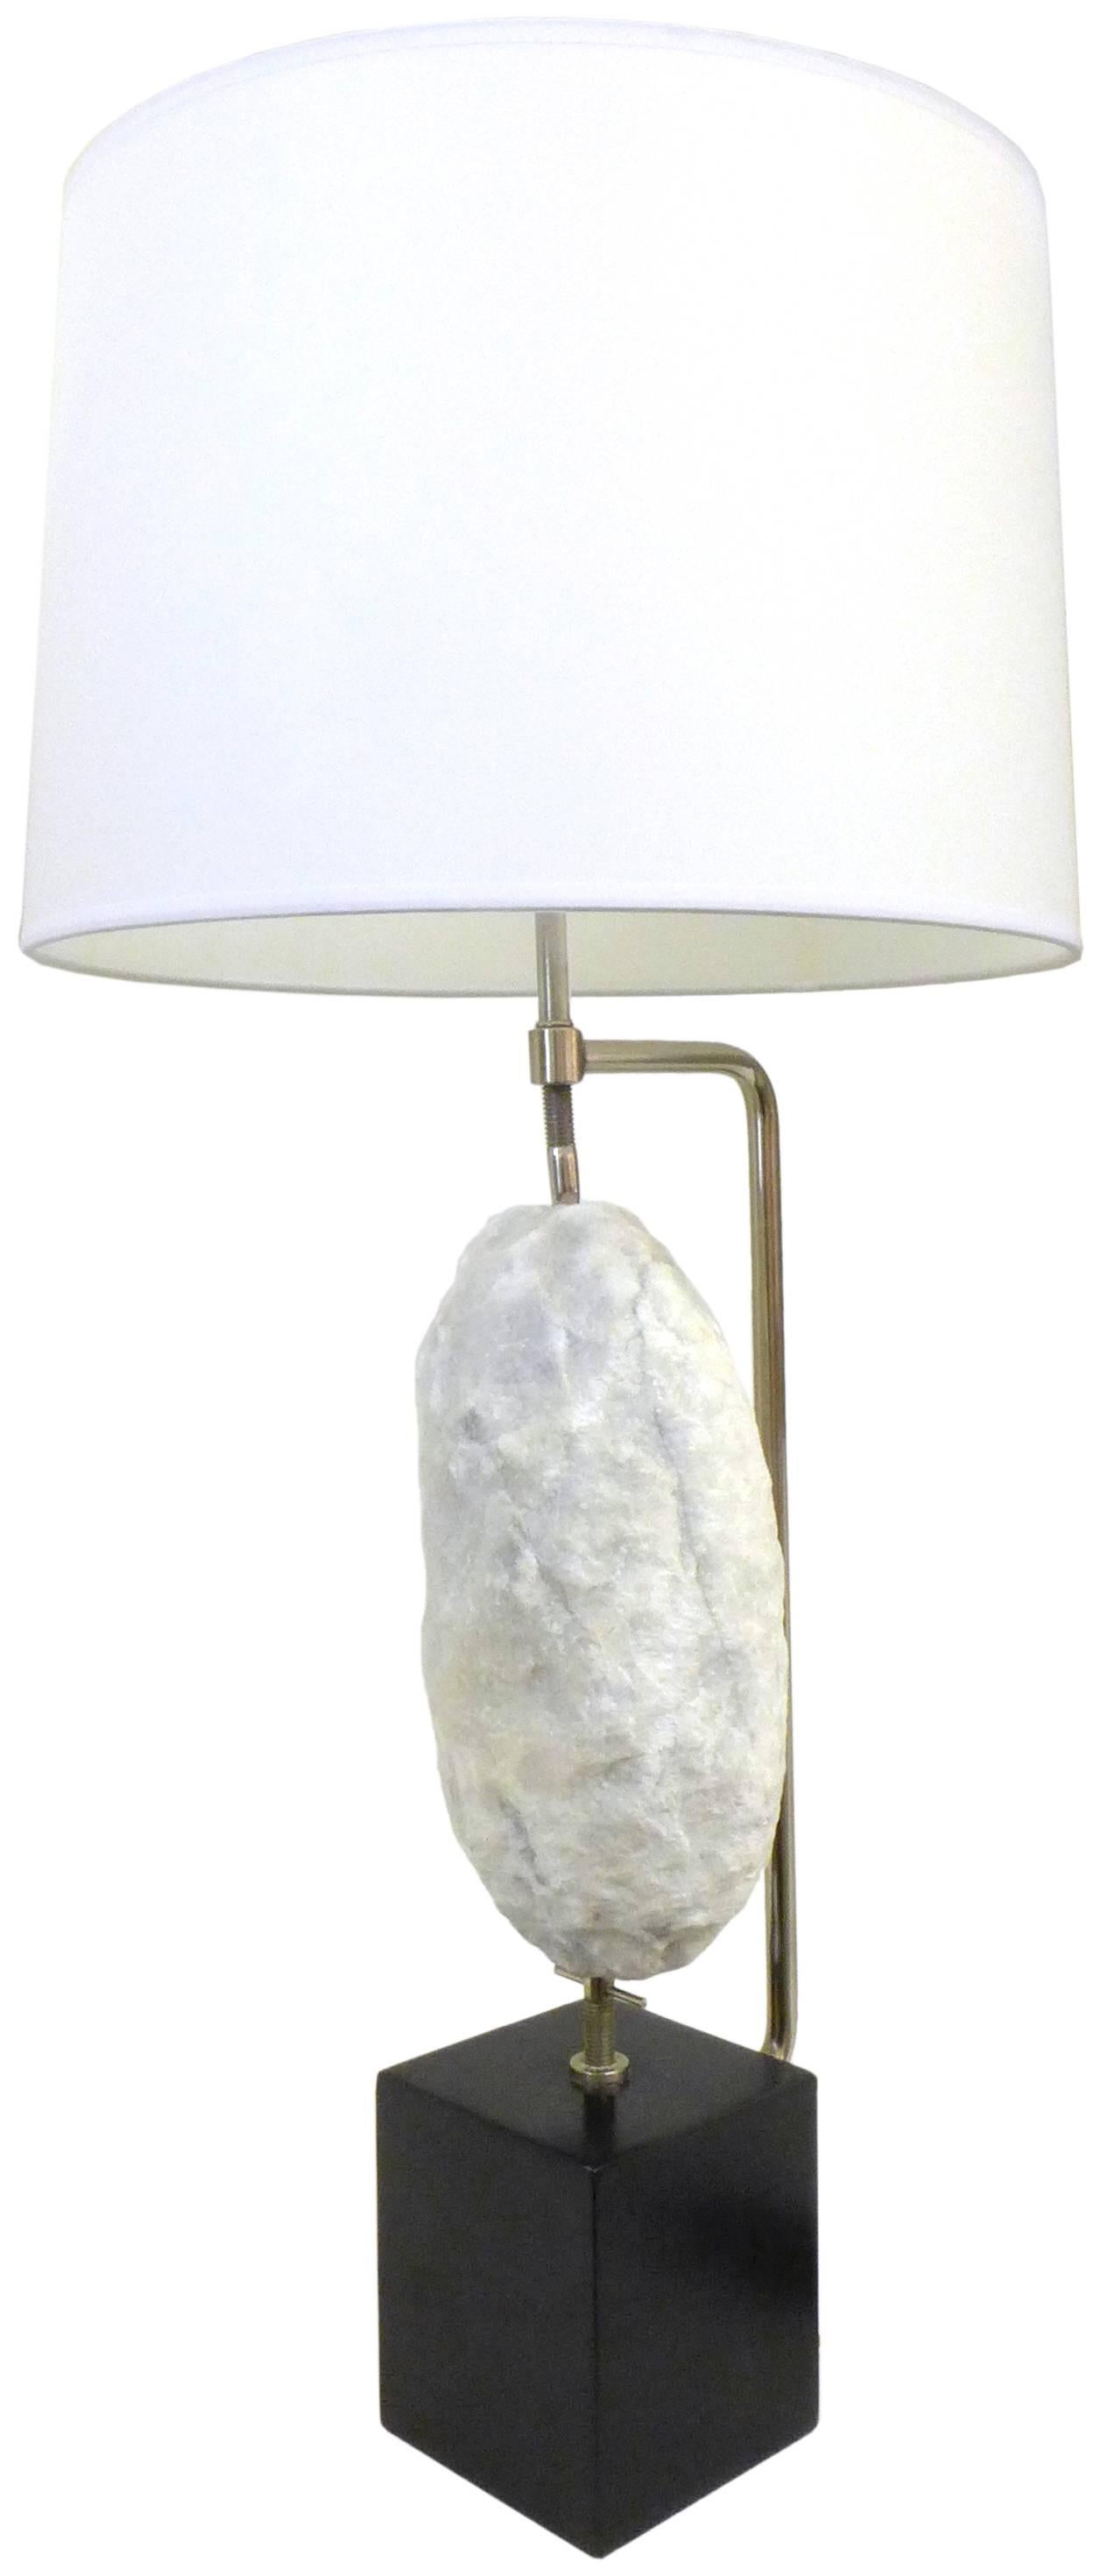 A wonderful quartz-specimen table lamp. A subtly-scintillant, rough-hewn hunk of white quartz displayed suspended in a threaded, chromed-steel, vise-like armature; all mounted to a simple black-cube metal base. An eye-catching mix of materials;